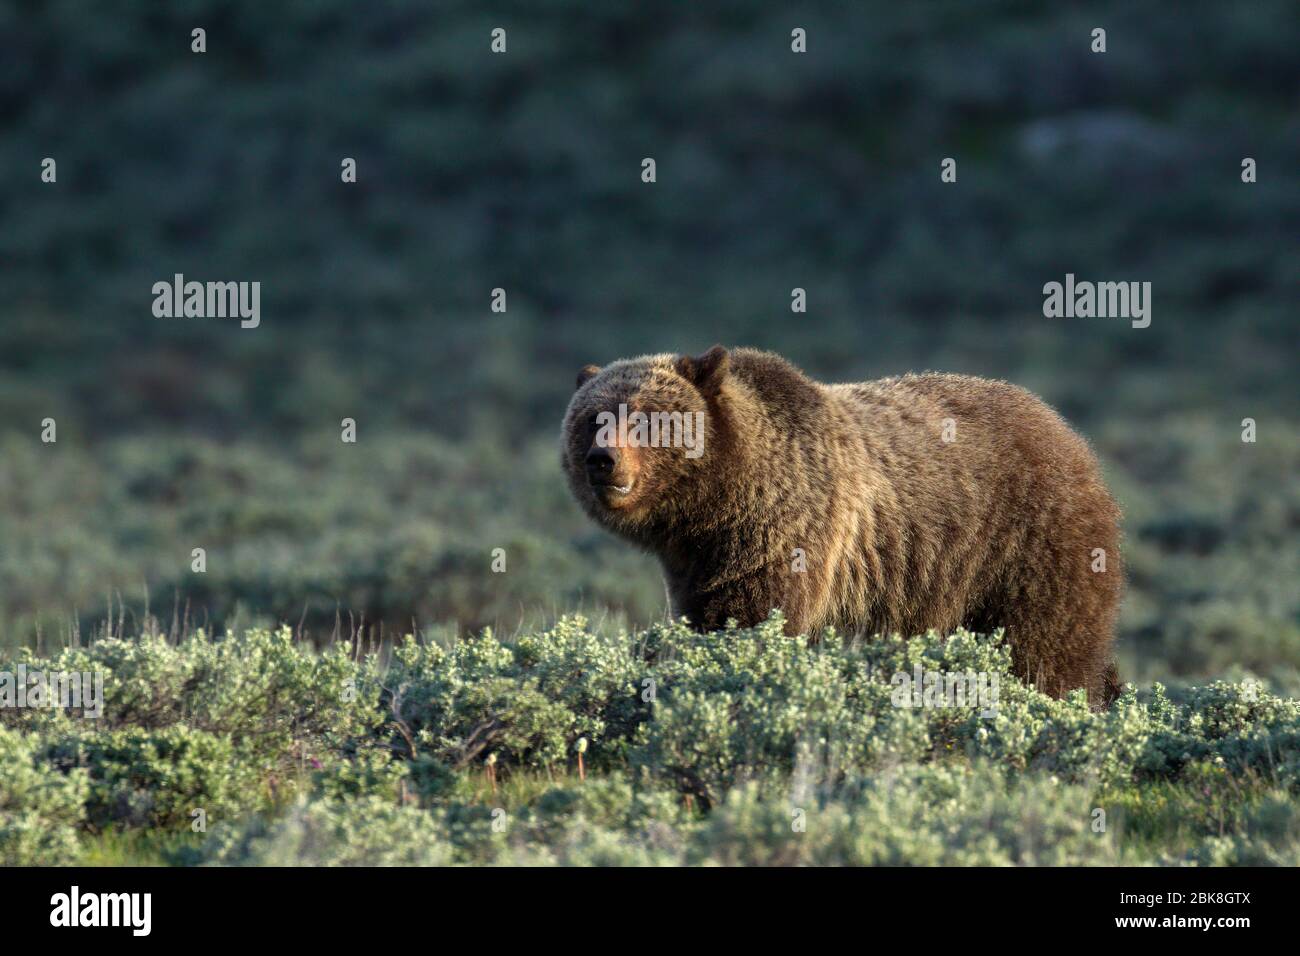 Grizzly bear in Wyoming Stock Photo